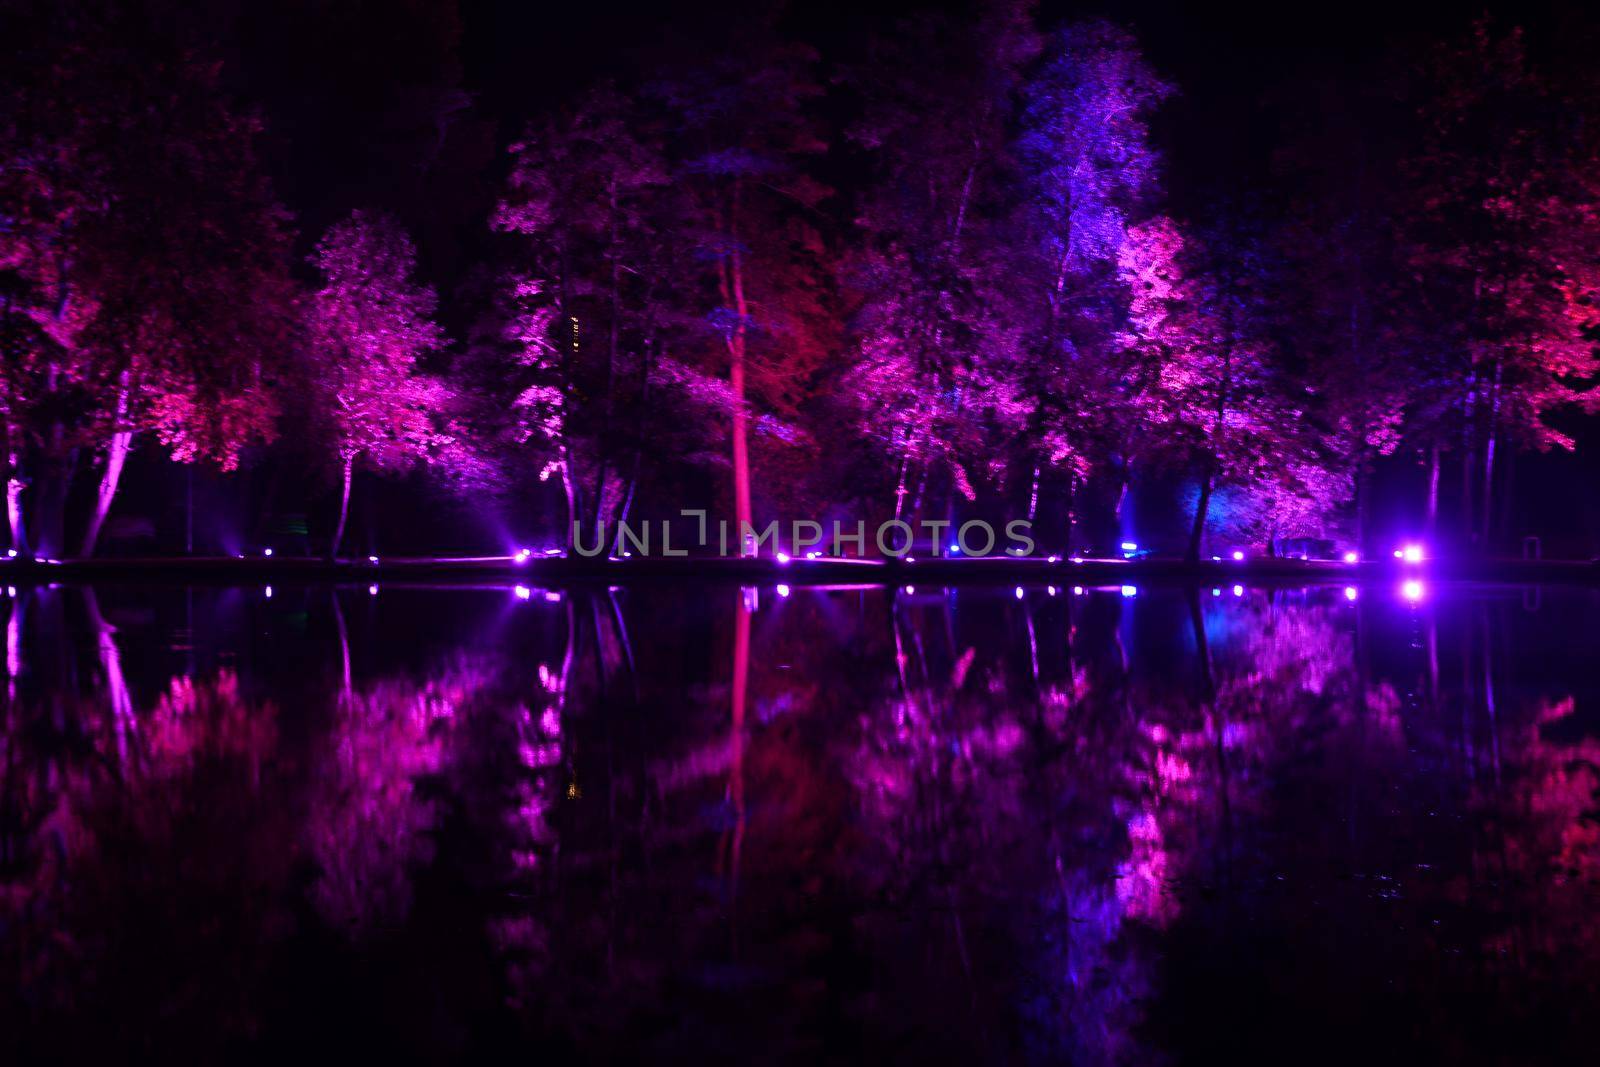 Neon light night show in a park on a city lake in Genk, Belgium, trees illuminated in a mesmerizing blue-purple color are reflected in the water. High quality photo